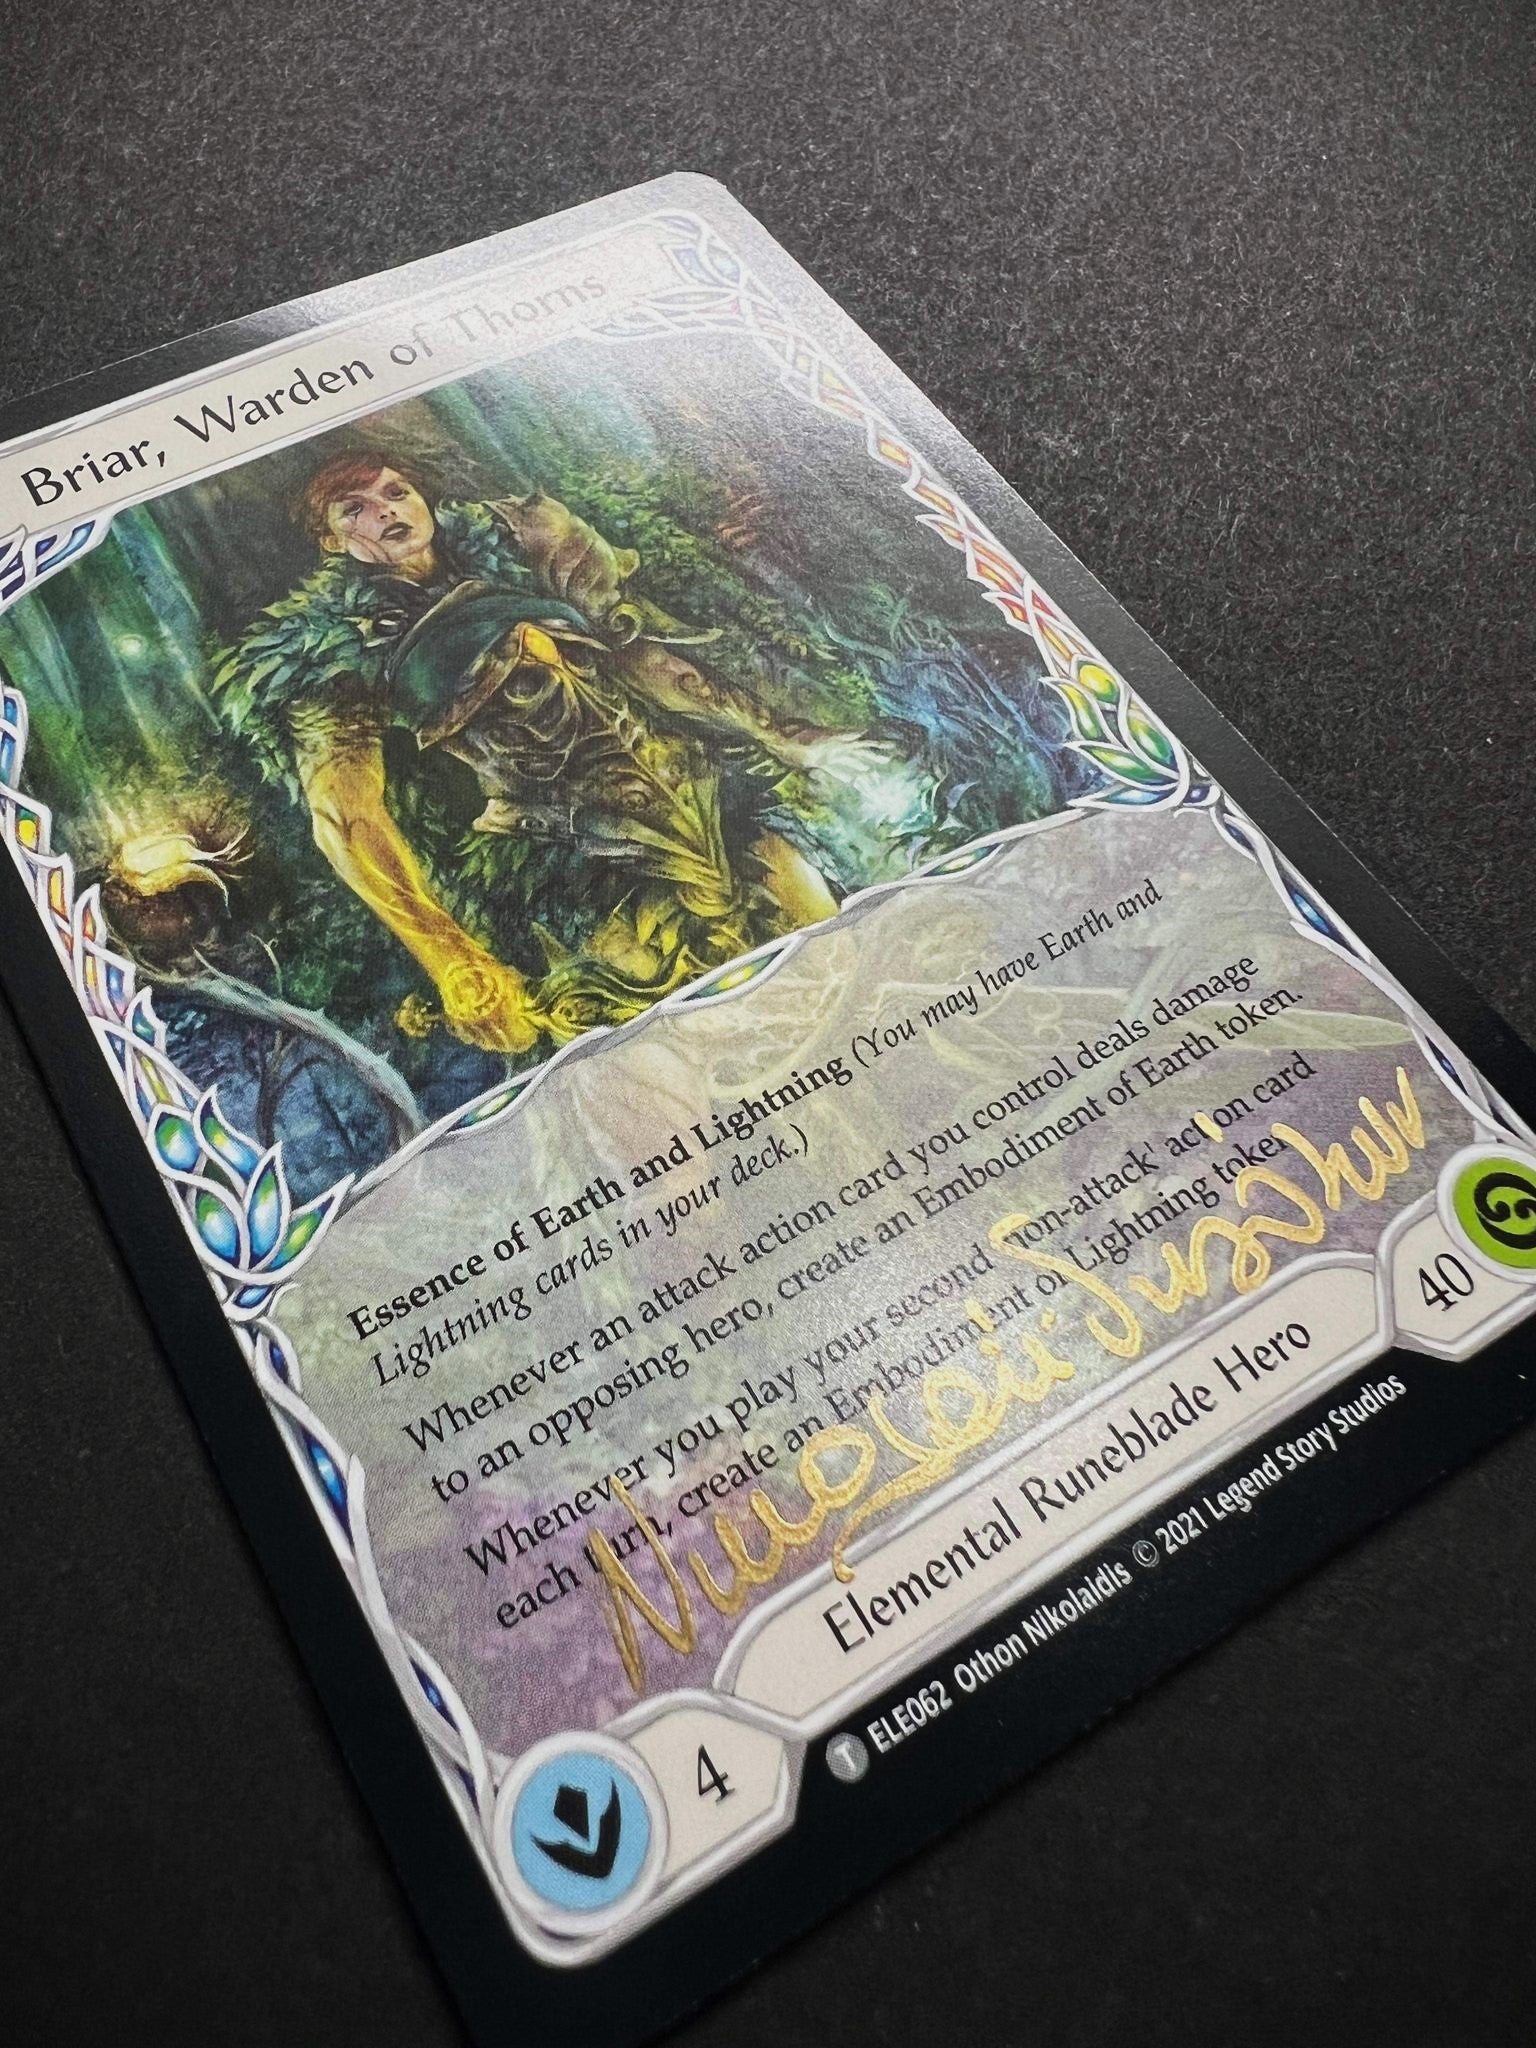 Signed Hero "Briar, Warden of Thorns"